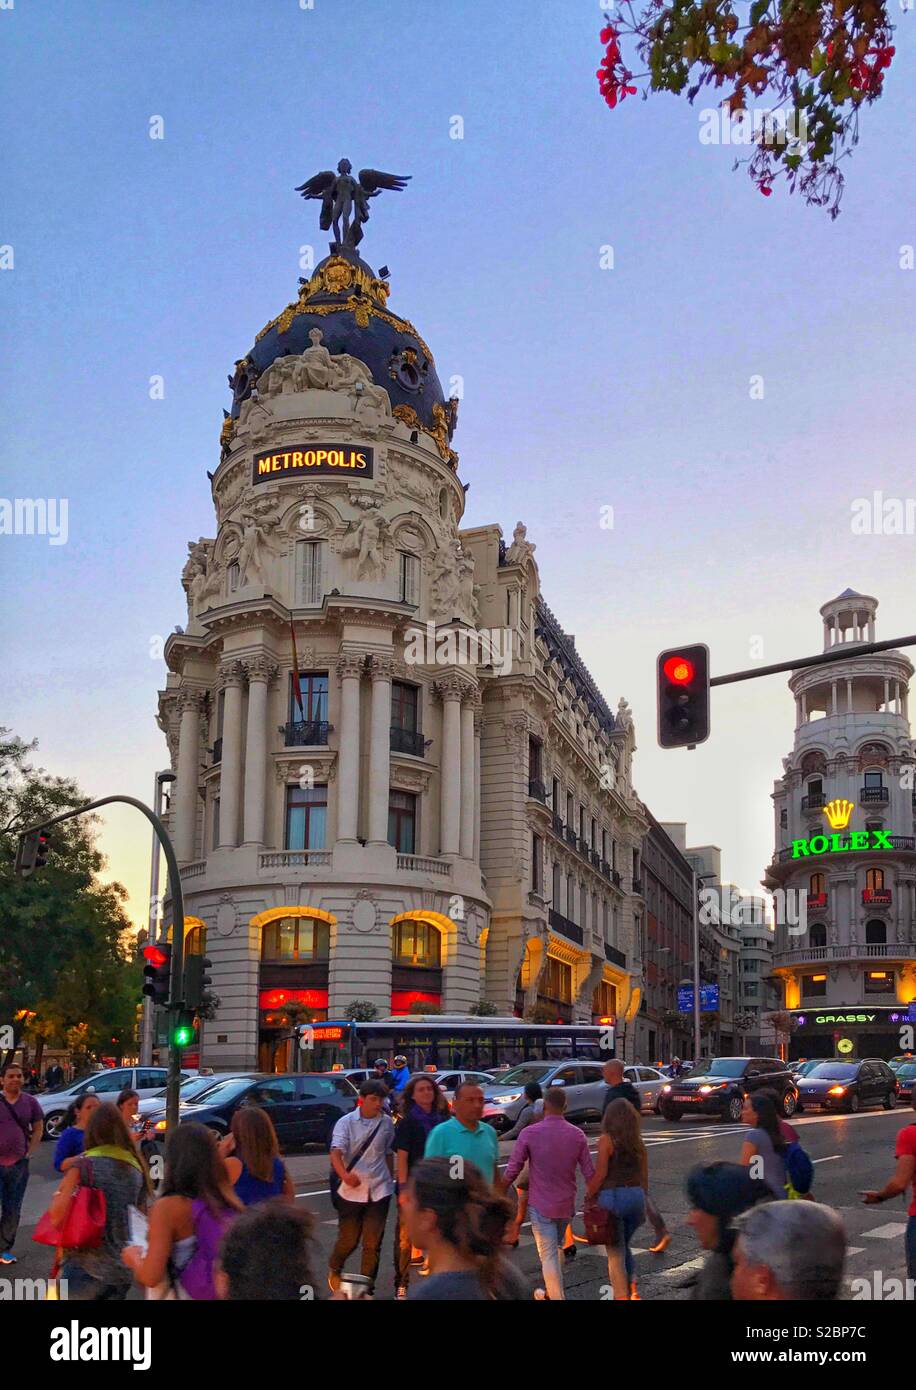 A twilight view of the famous Metropolis Building (Edifico Metrópolis) on the corner of Calle de Alcalá in the centre of Madrid, Spain. The building was inaugurated in 1911. Photo © COLIN HOSKINS. Stock Photo